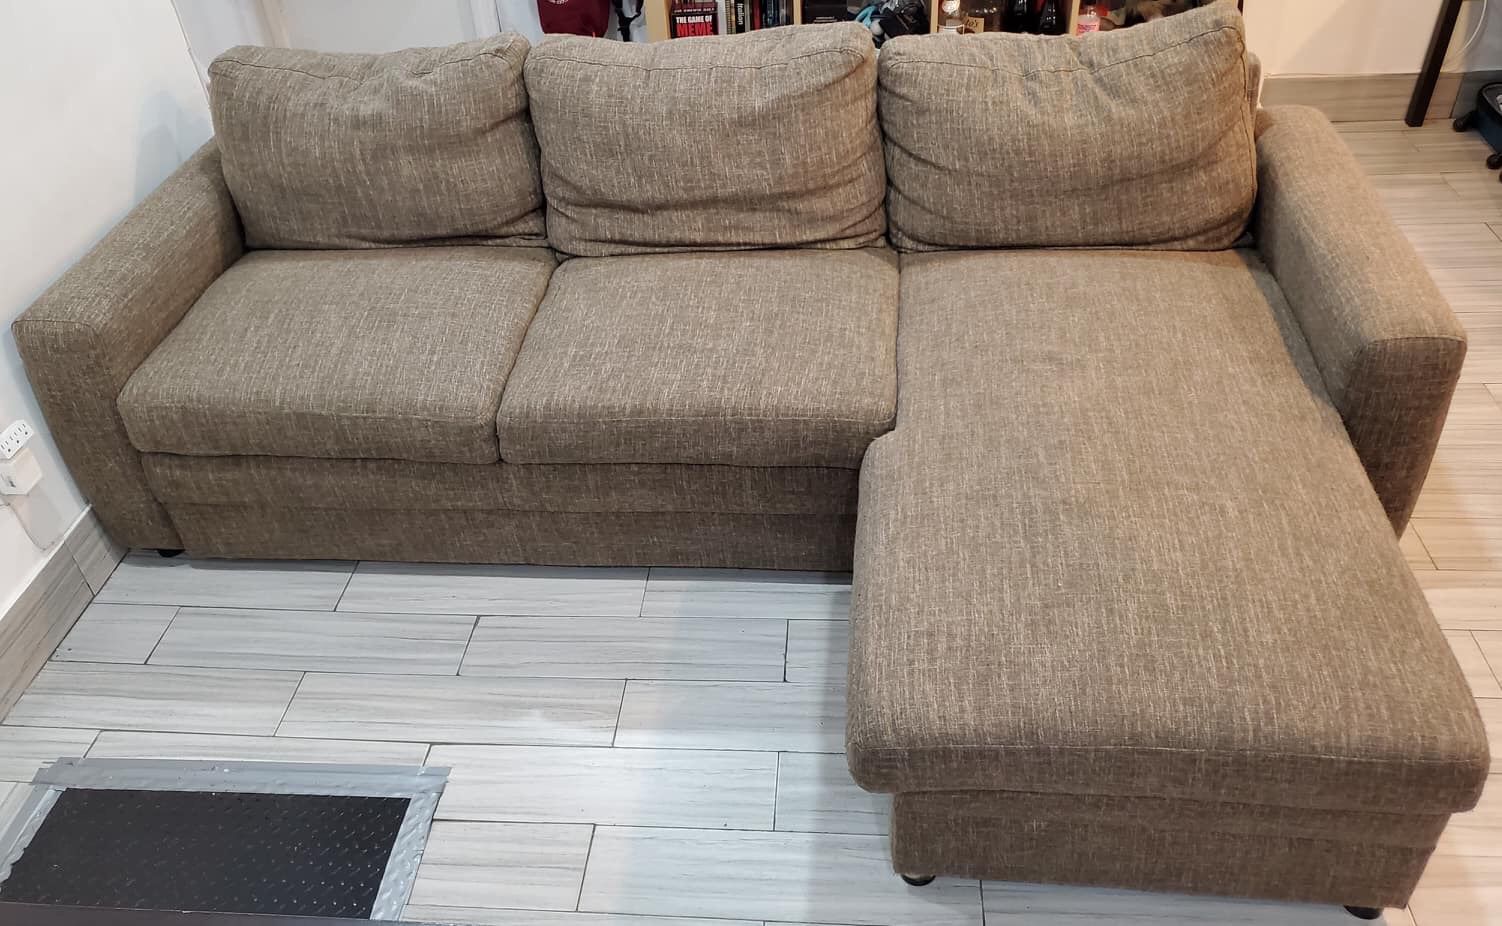 L shape sectional couch with storage and pull out couch